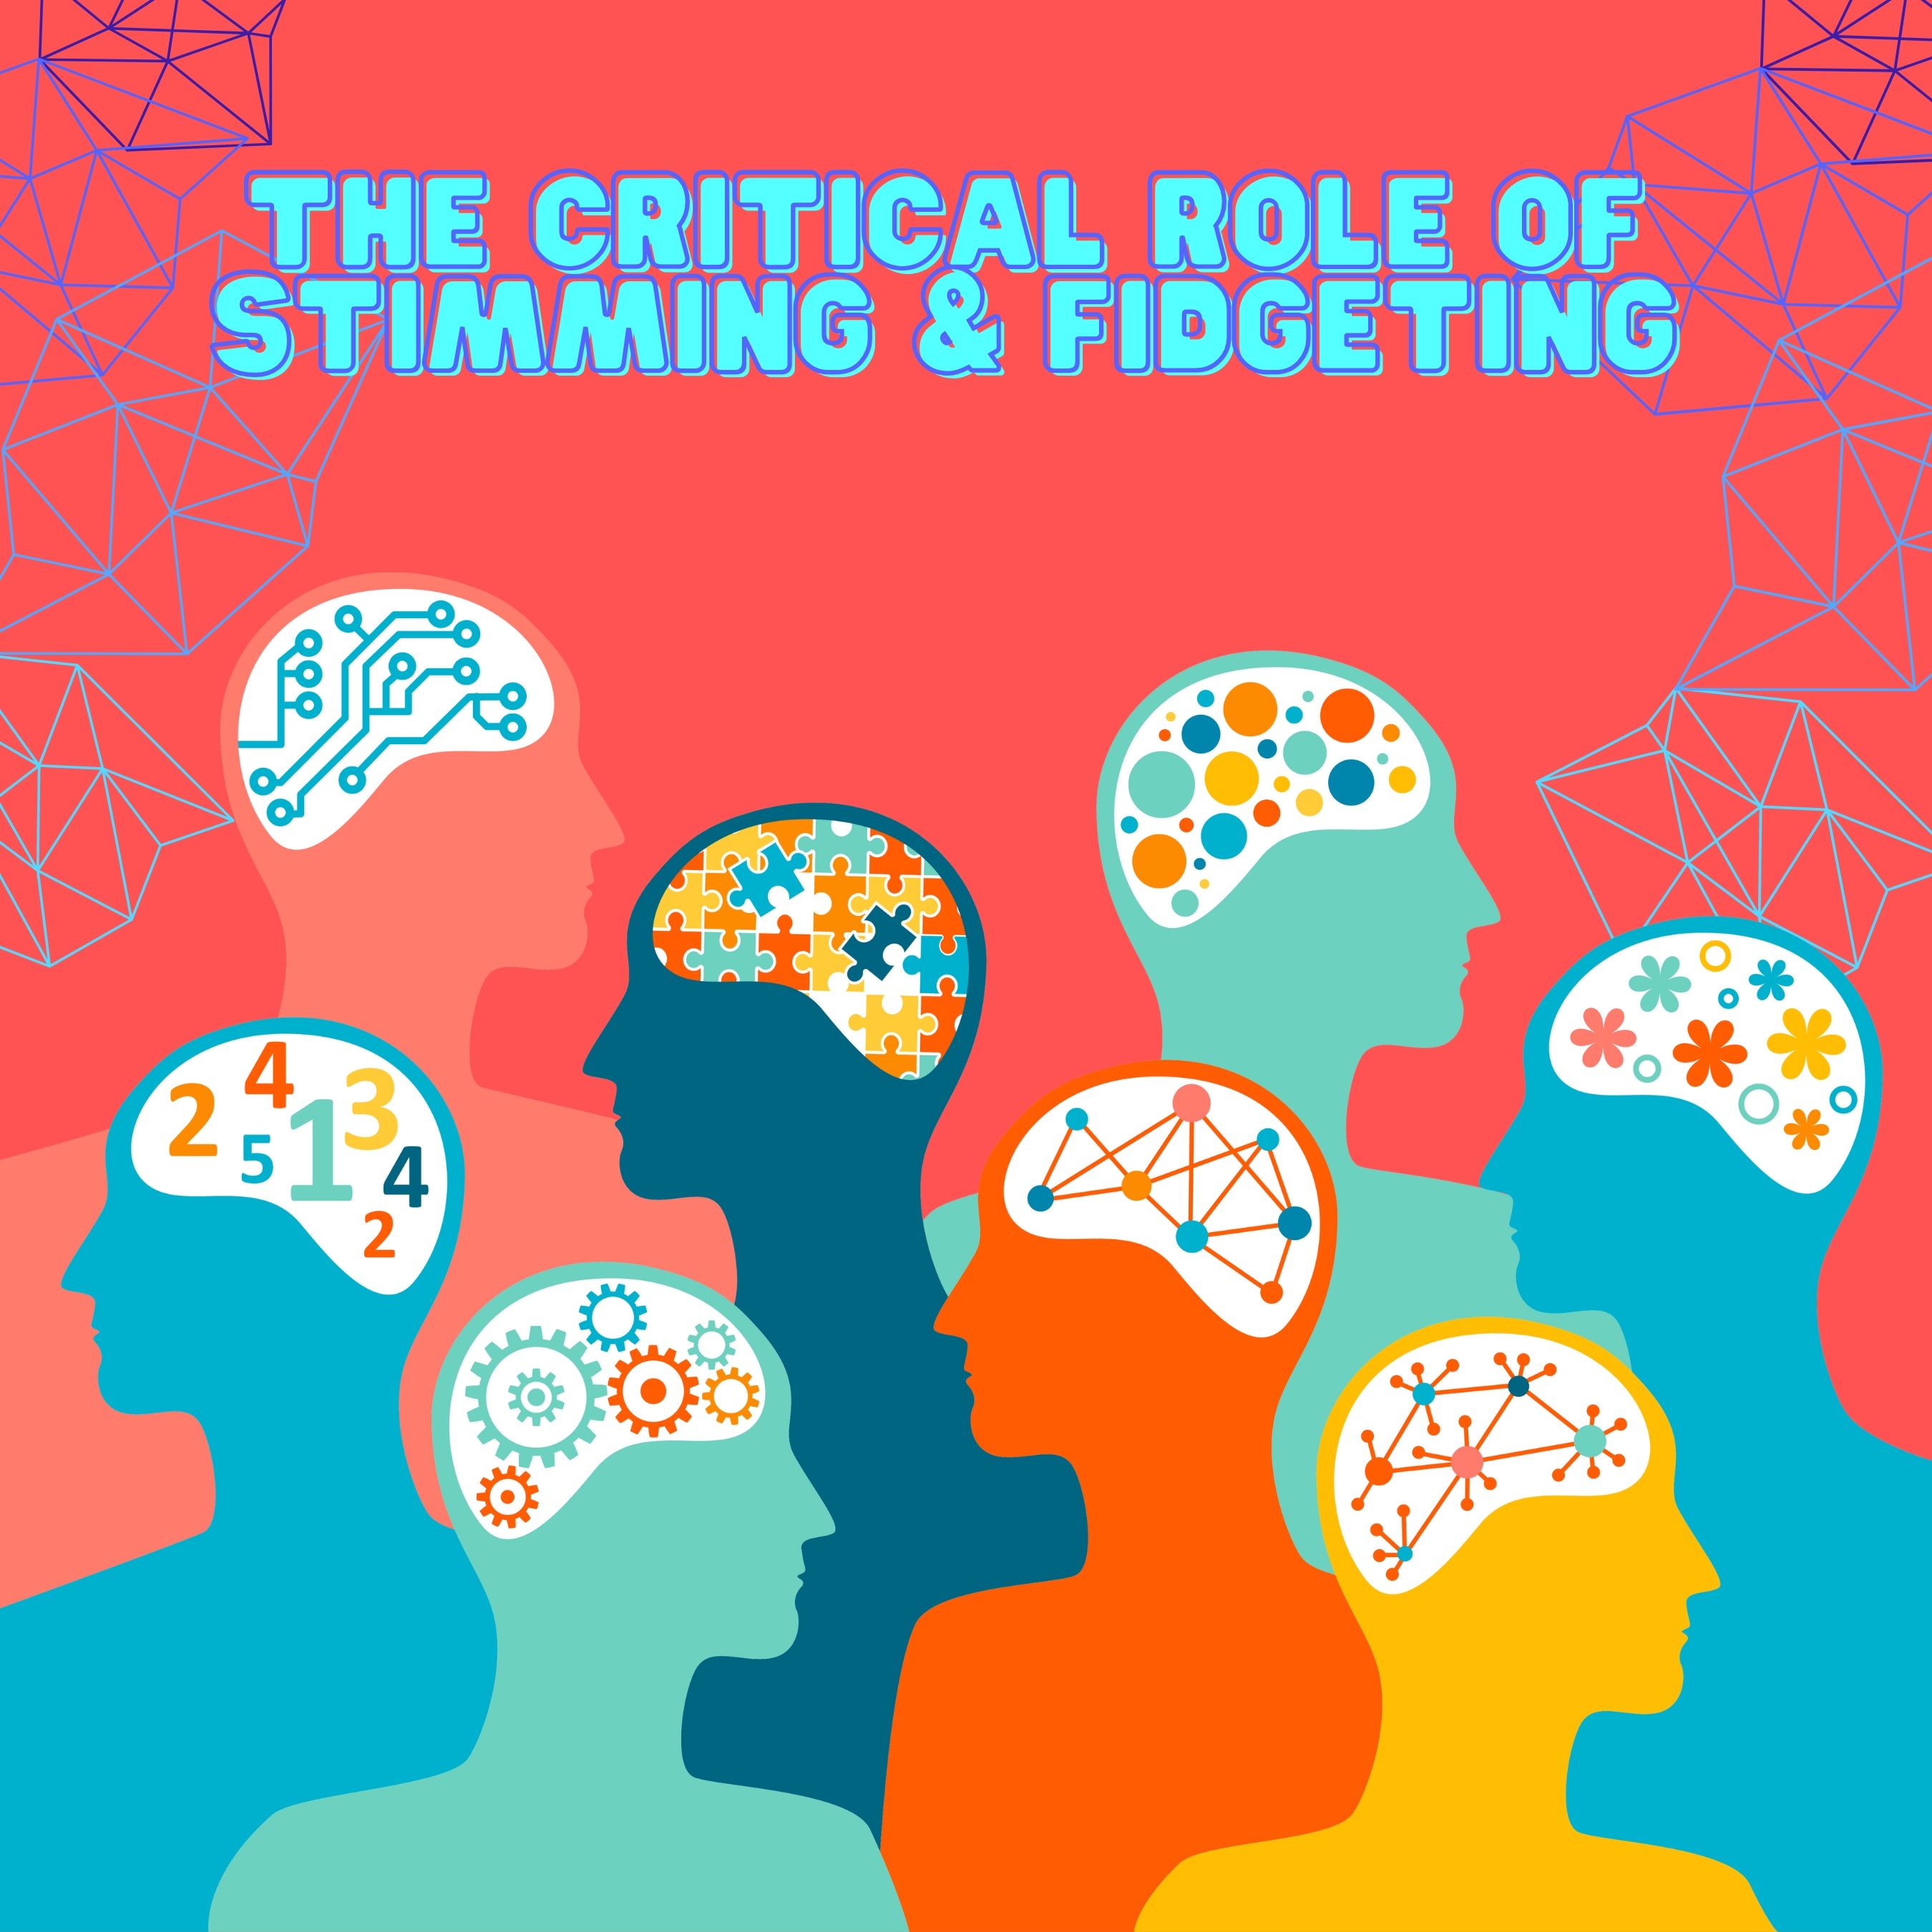 The Critical Role of Stimming & Fidgeting: A Neurodivergent Perspective